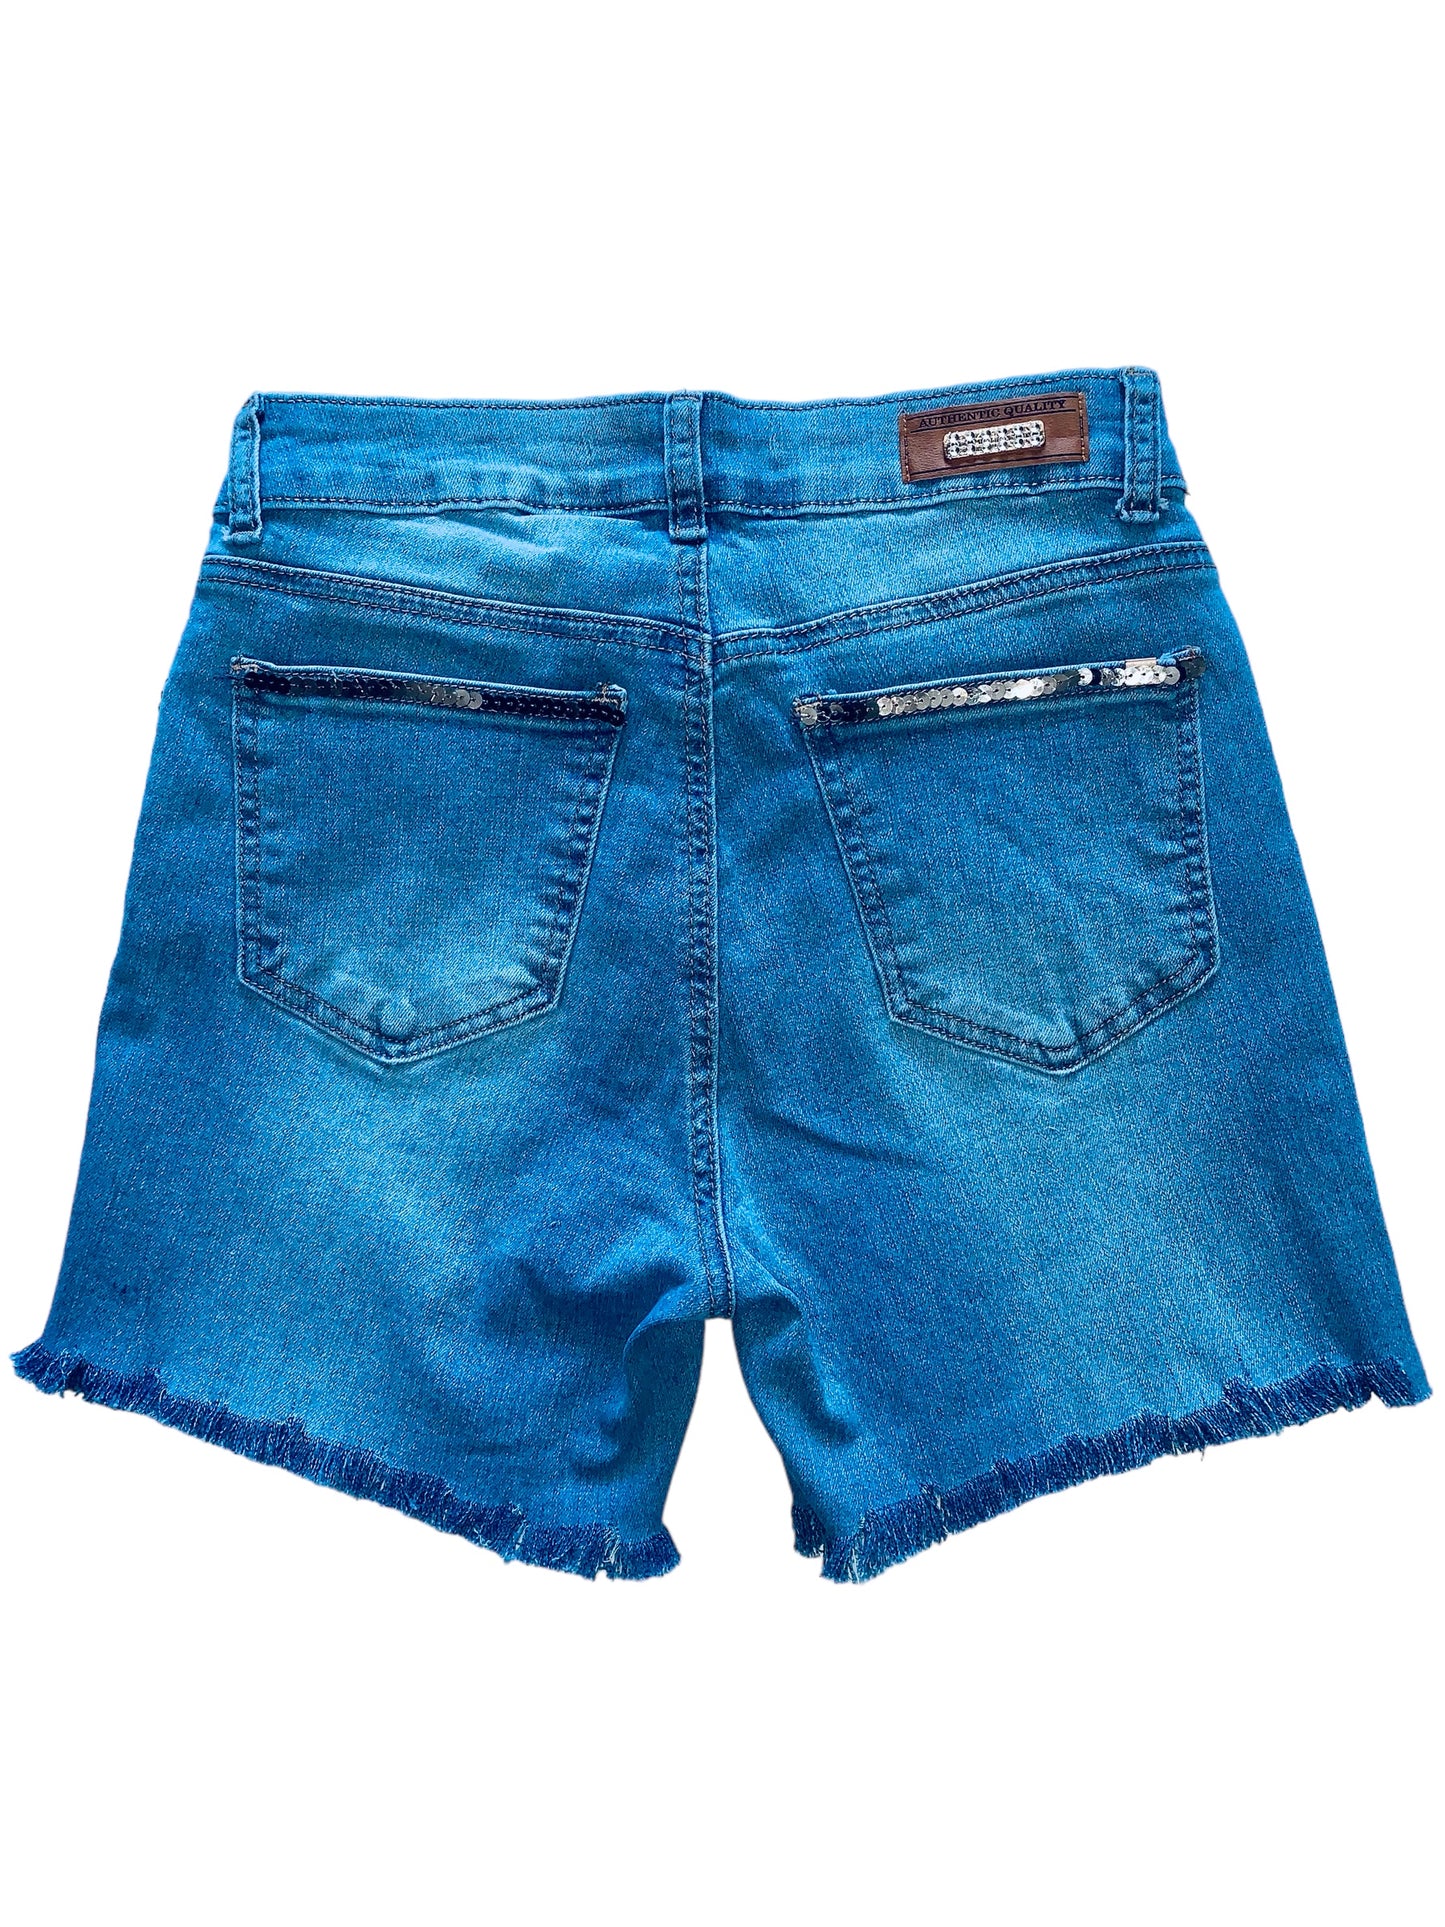 SHORTS JEANS EMBELLISHED J4334.  PACKAGE 6 PIECES. 1S 2M 2L 1XL.  $18.90  UNIT PRICE